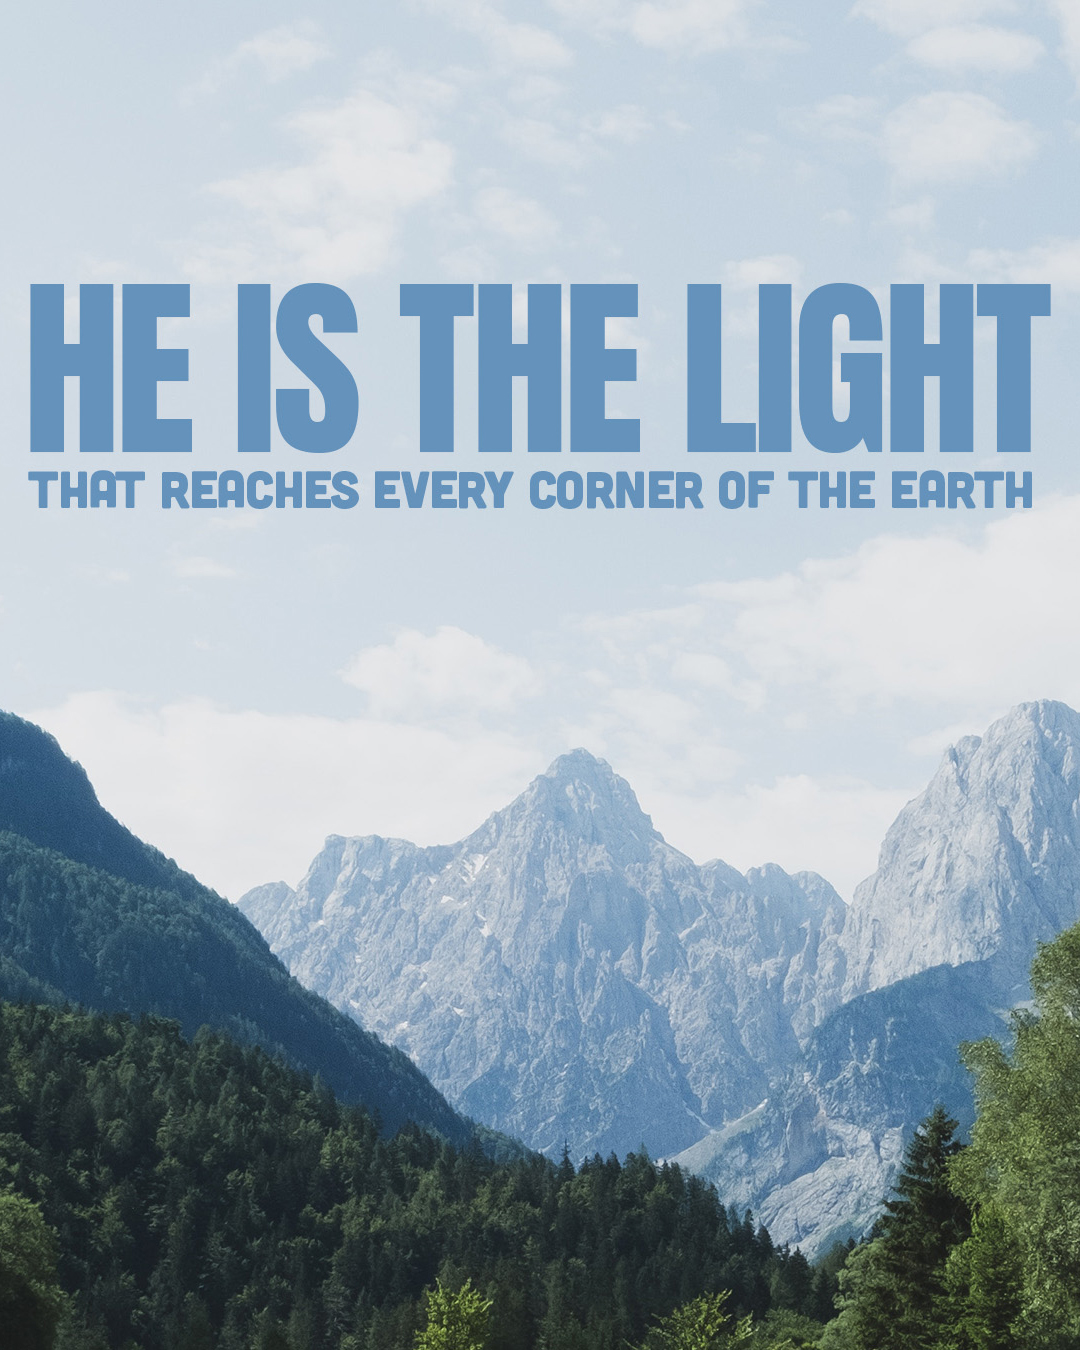 He is the light